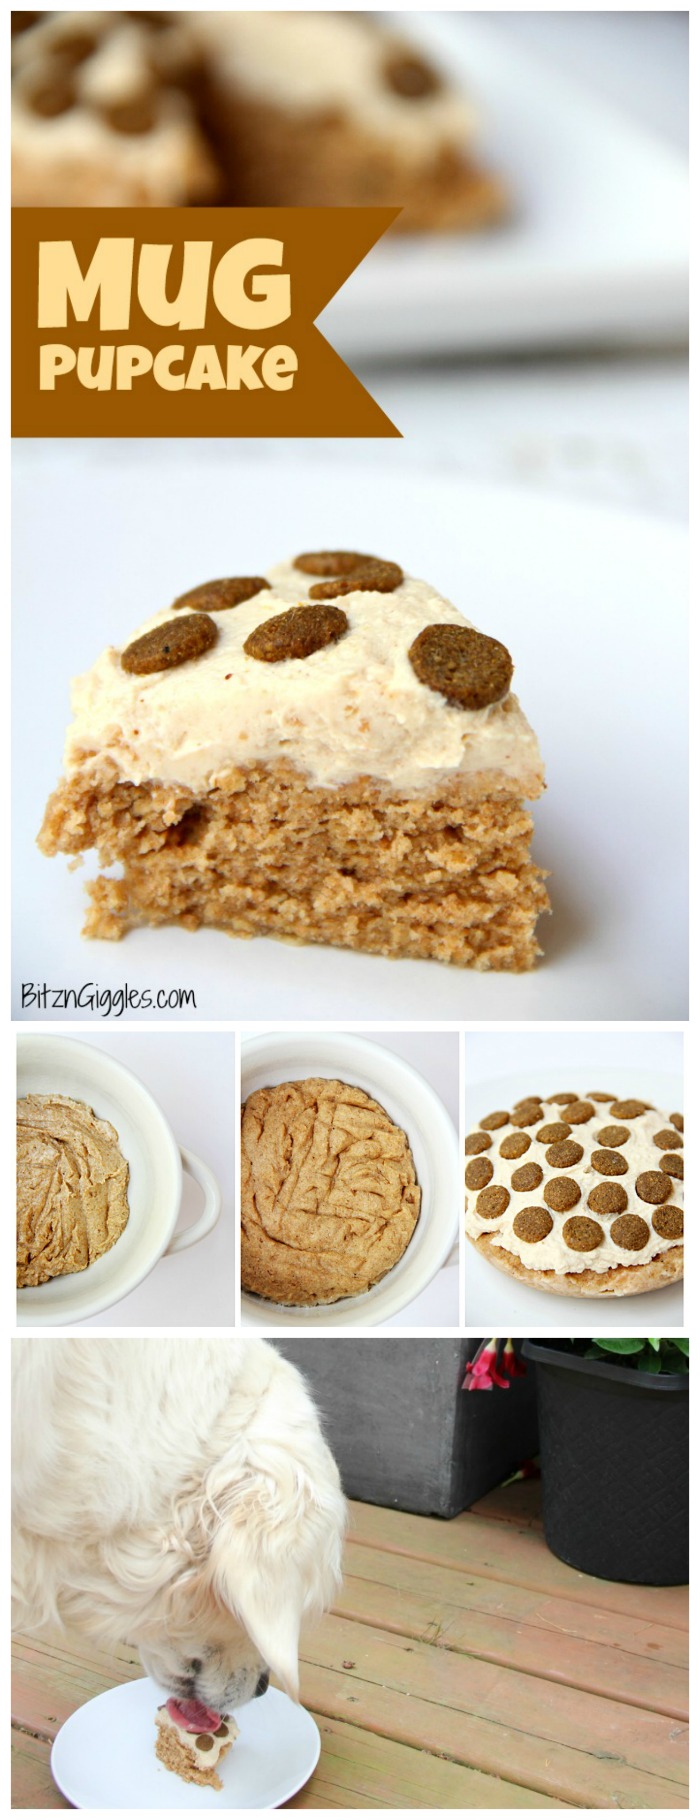 Microwave Mug Pupcake - a quick, microwaveable dog treat! This cake bakes in 90 seconds and is topped with a simple two-ingredient frosting!